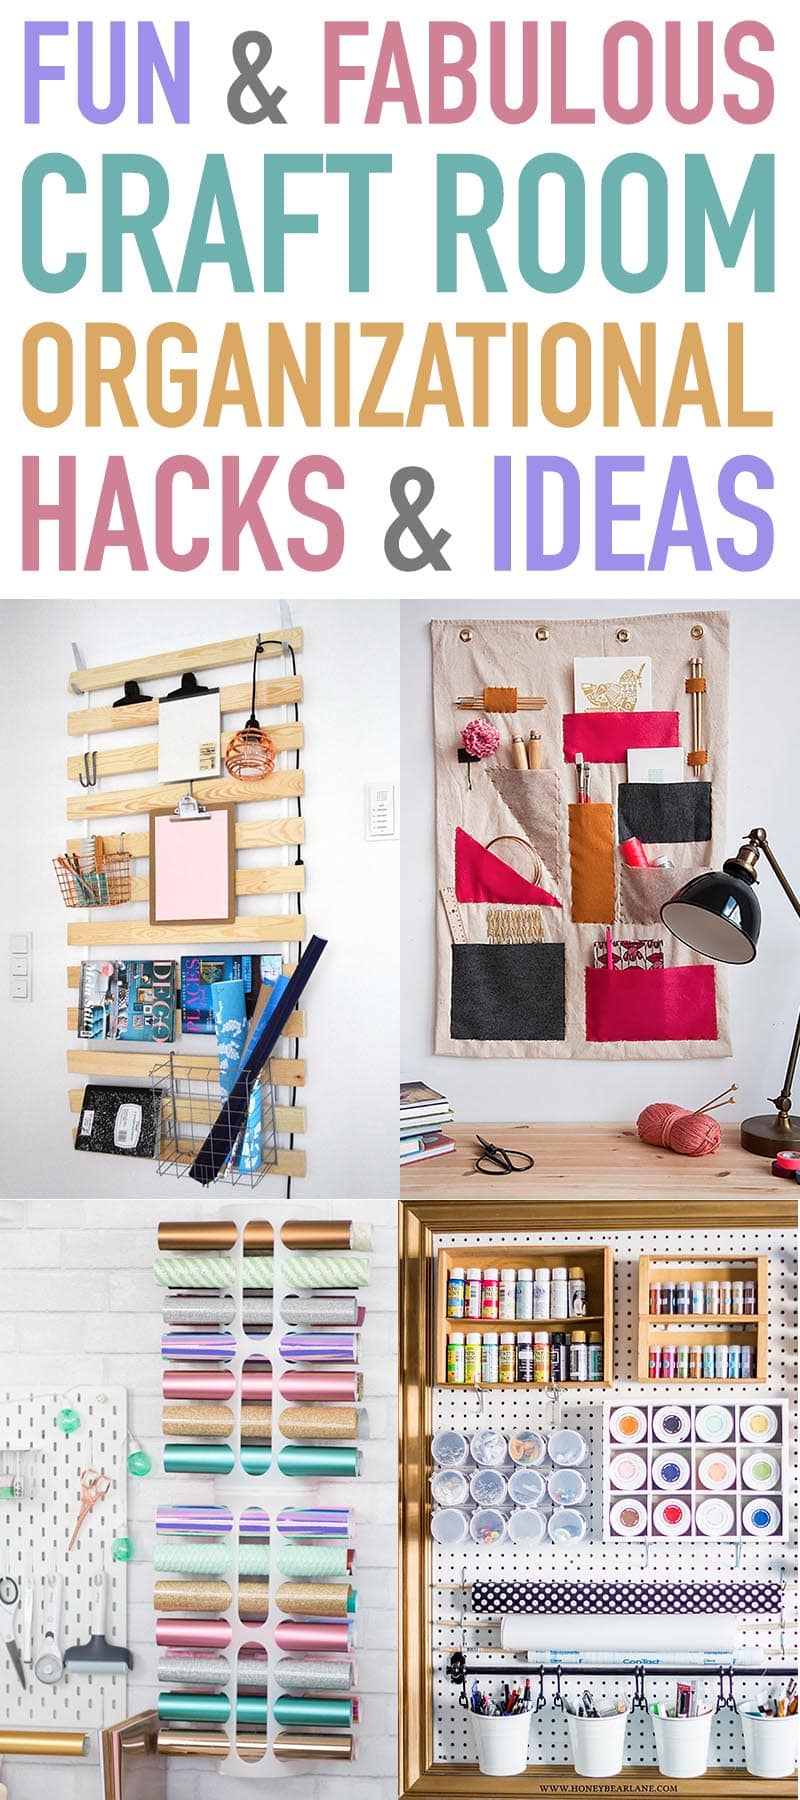 These Fun and Fabulous Craft Room Organization Hacks & Ideas are going to totally inspire you to get in your Craft Room and give it a little flair!